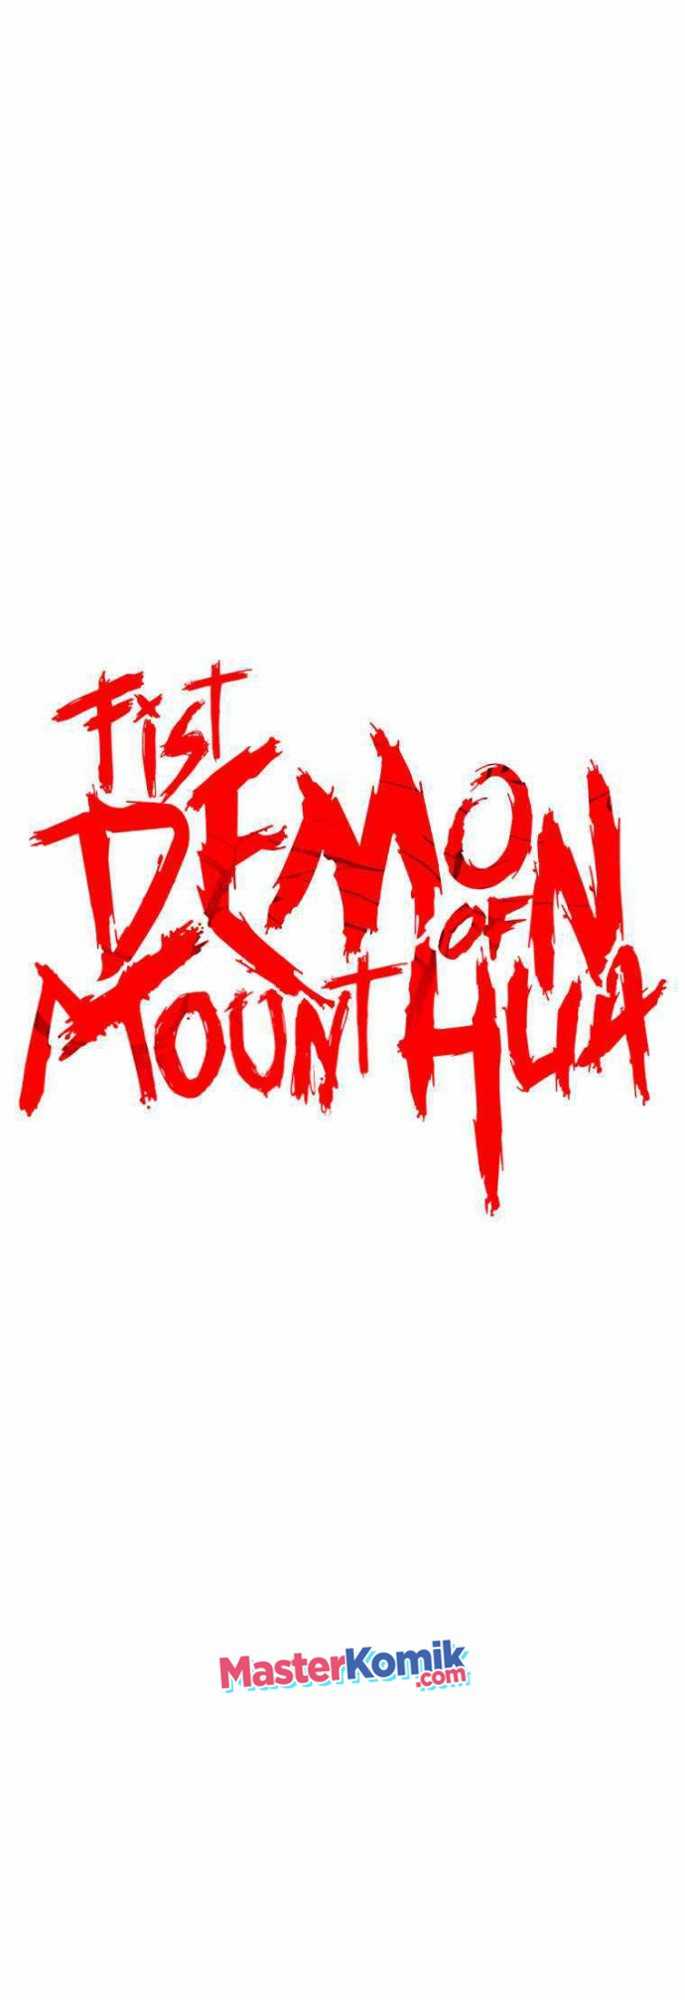 Fist Demon Of Mount Hua Chapter 74